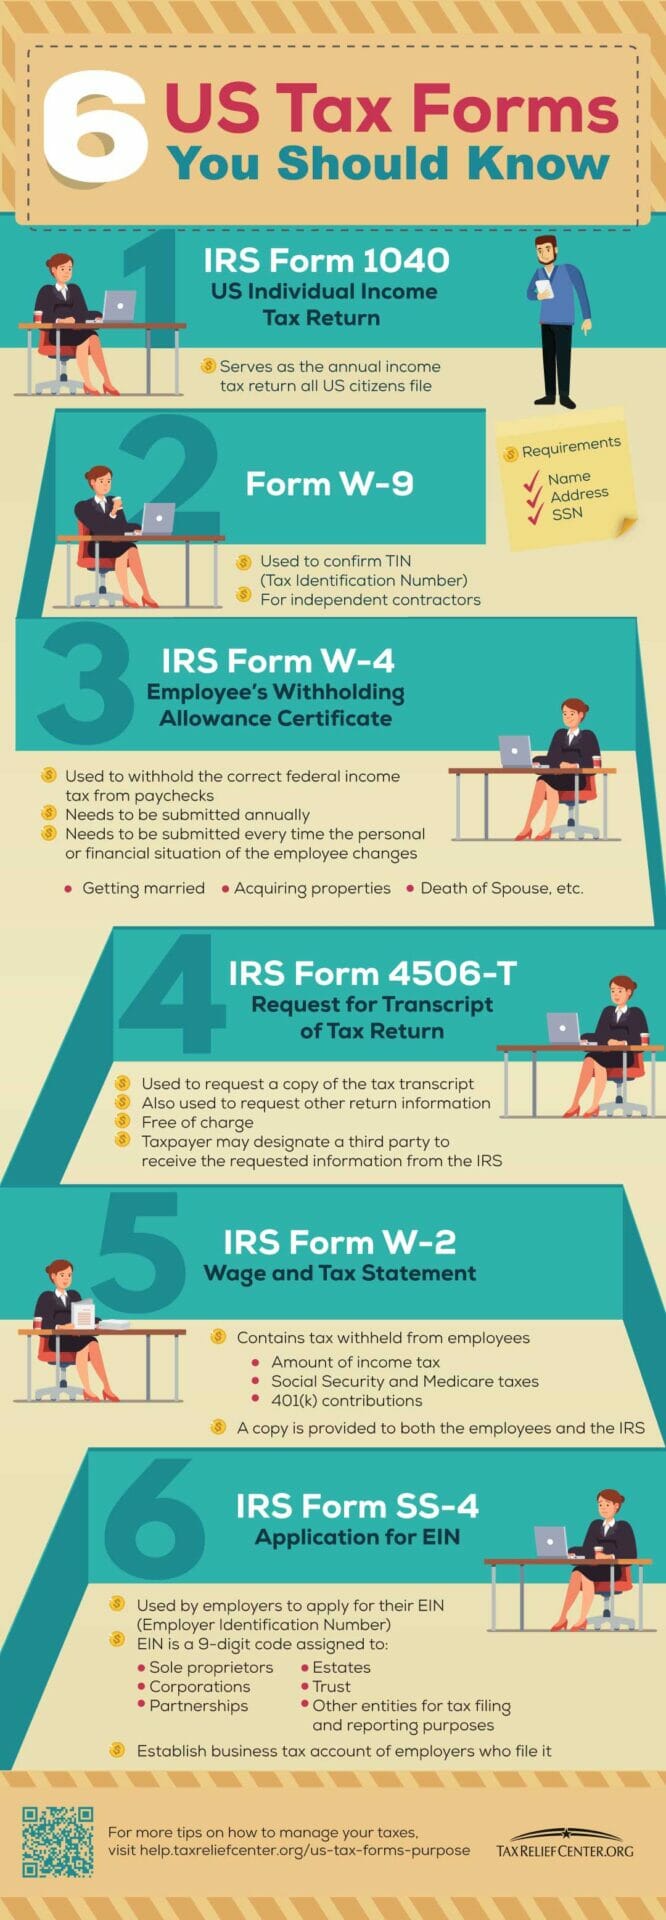 9 US Tax Forms and Their Purpose [INFOGRAPHIC]